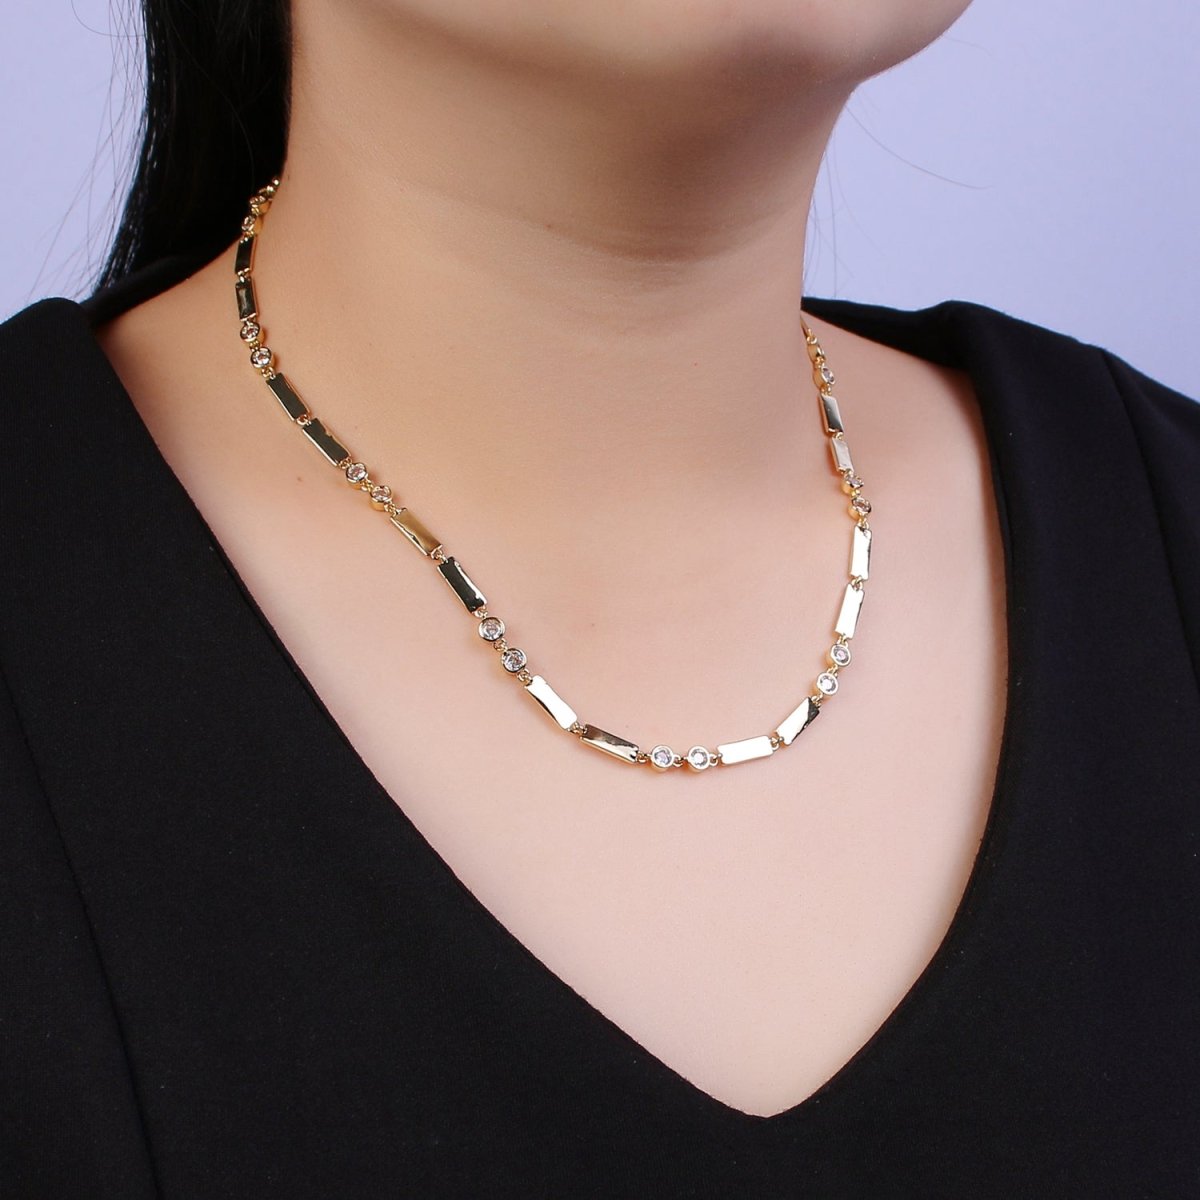 Gold Bezel Chain Necklace, Flat Bar Satellite Layered Jewelry • Layering Necklace for Statement Necklace | WA-739 Clearance Pricing - DLUXCA